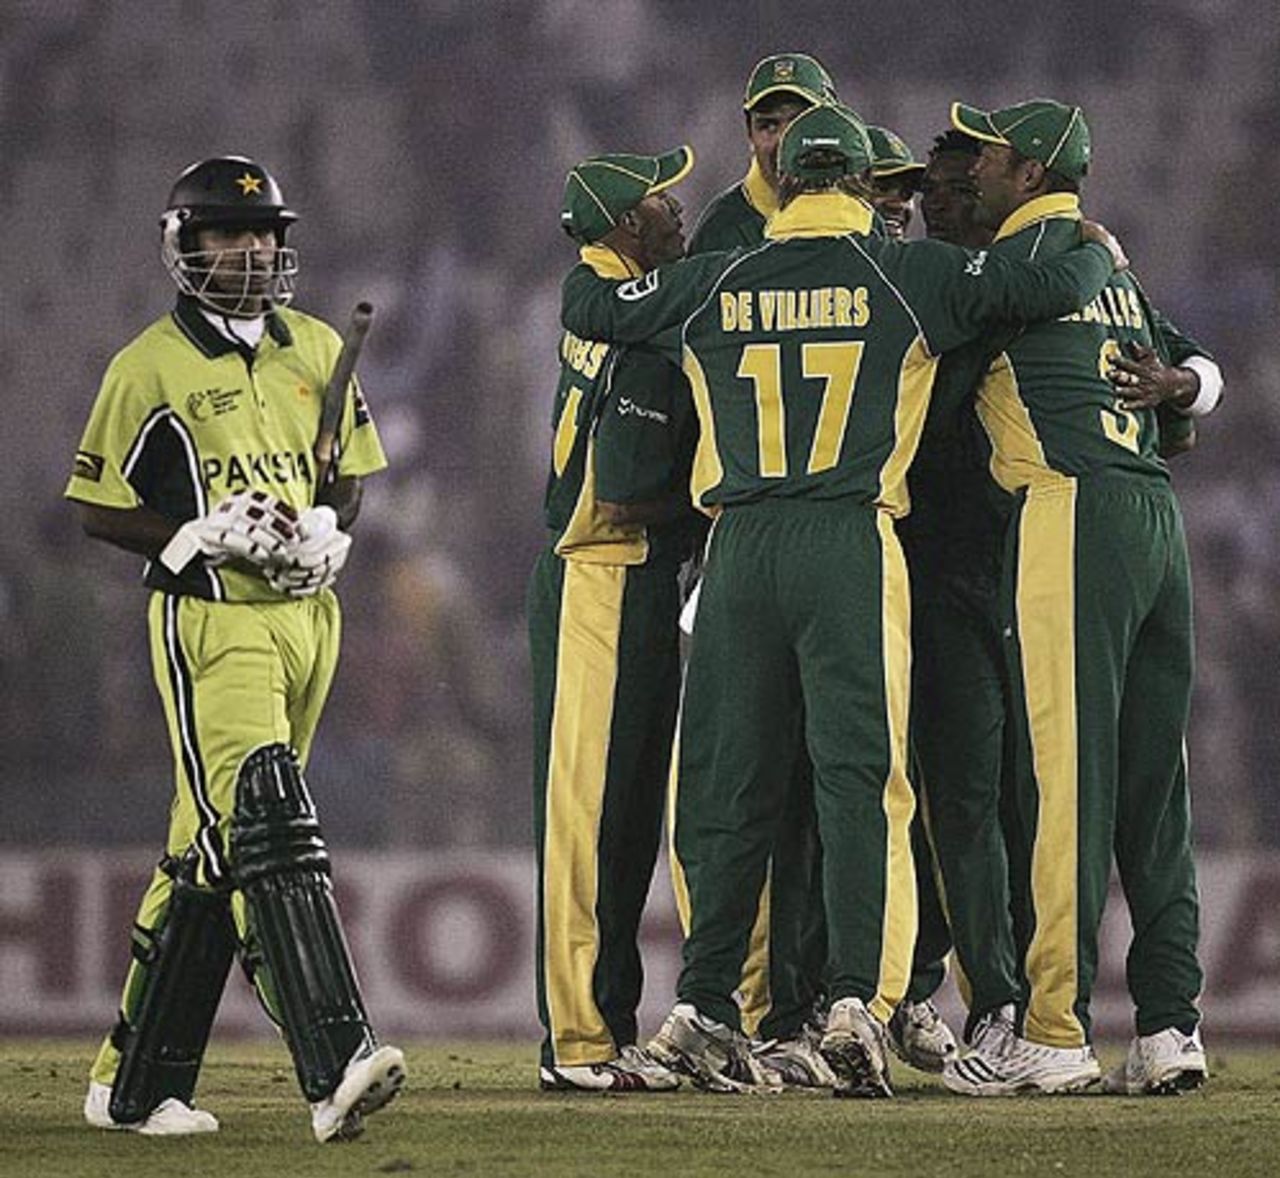 Makhaya Ntini dismissed Mohammad Hafeez in his first over, Pakistan v South Africa, Champions Trophy, 16th match, Mohali, October 27, 2006